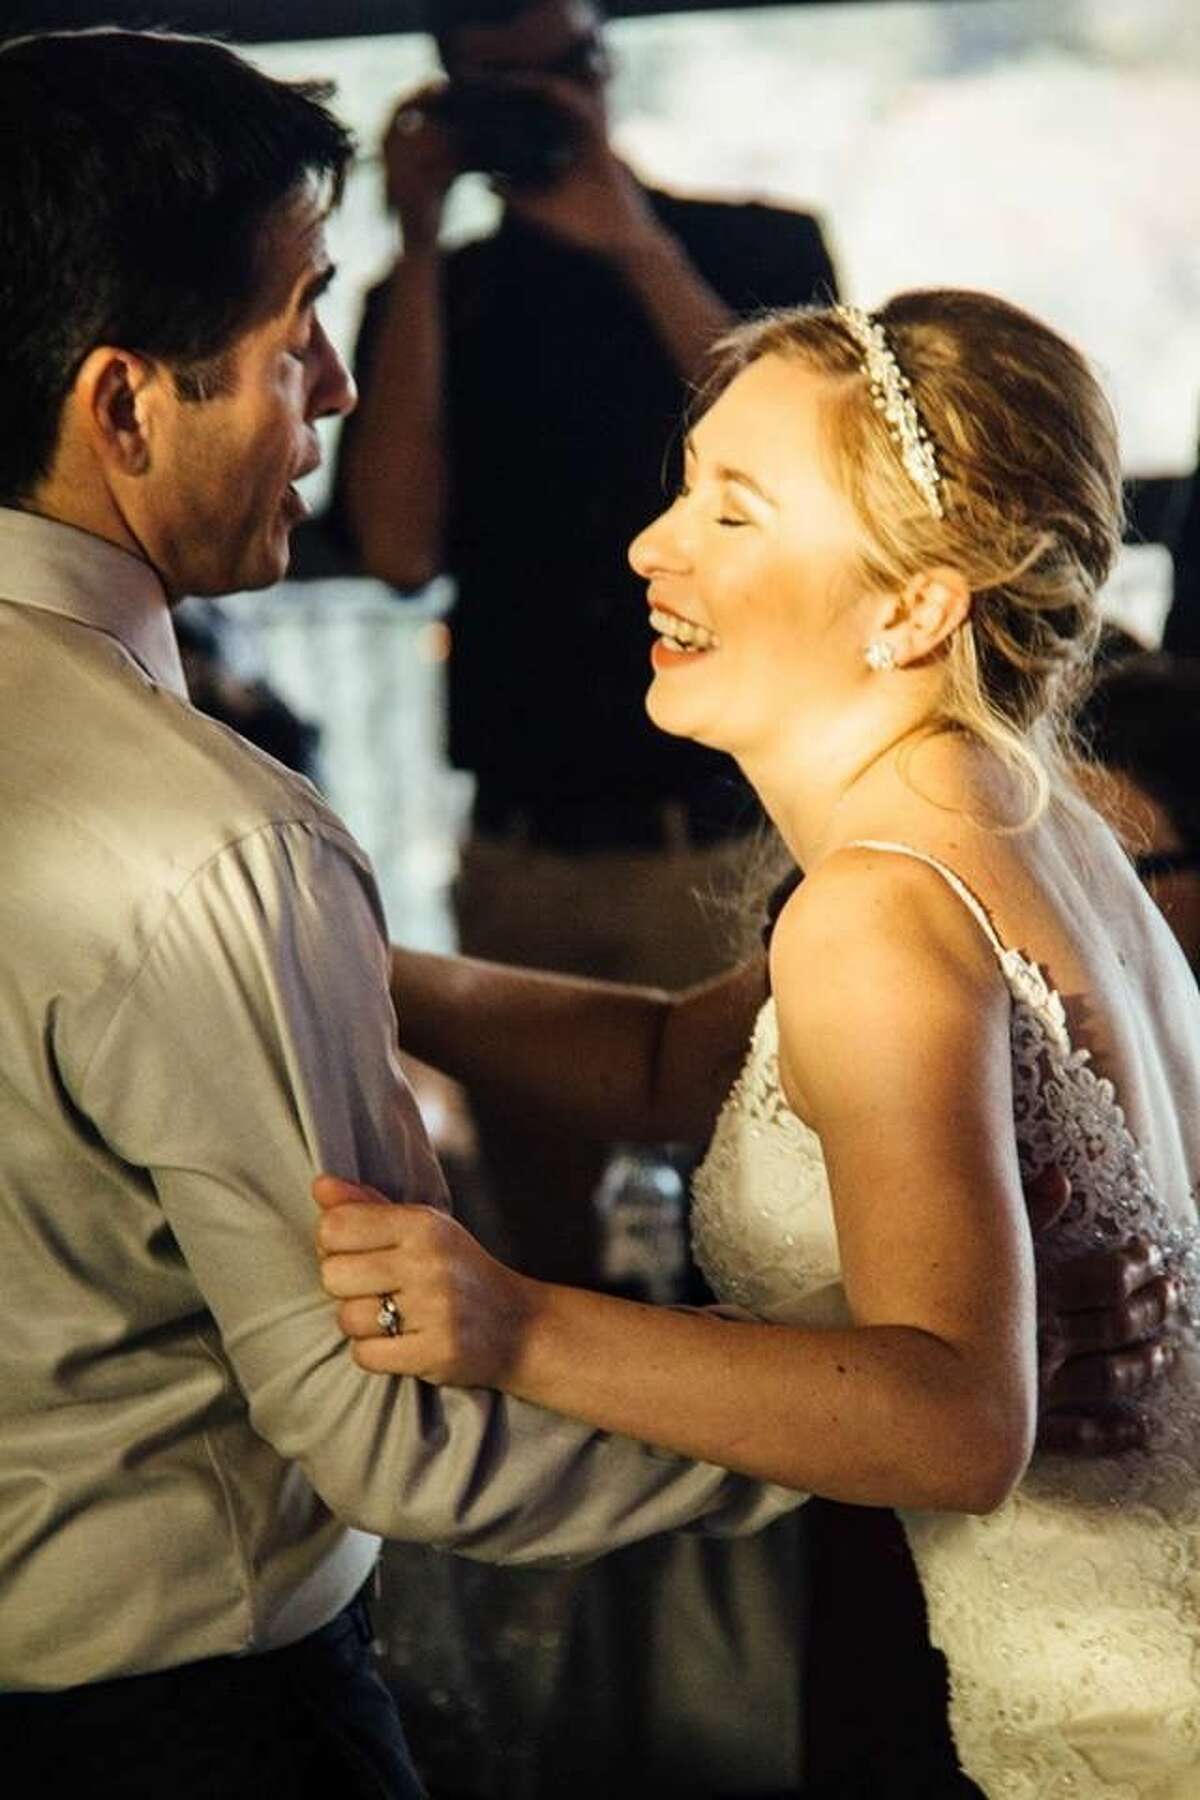 Hailey Reyes (right) dances with her father, Michael Reyes, at her wedding in December 2016. The two were shot May 12 at a home in the 700 block of Dogwood Trail in Cedar Park, Texas.